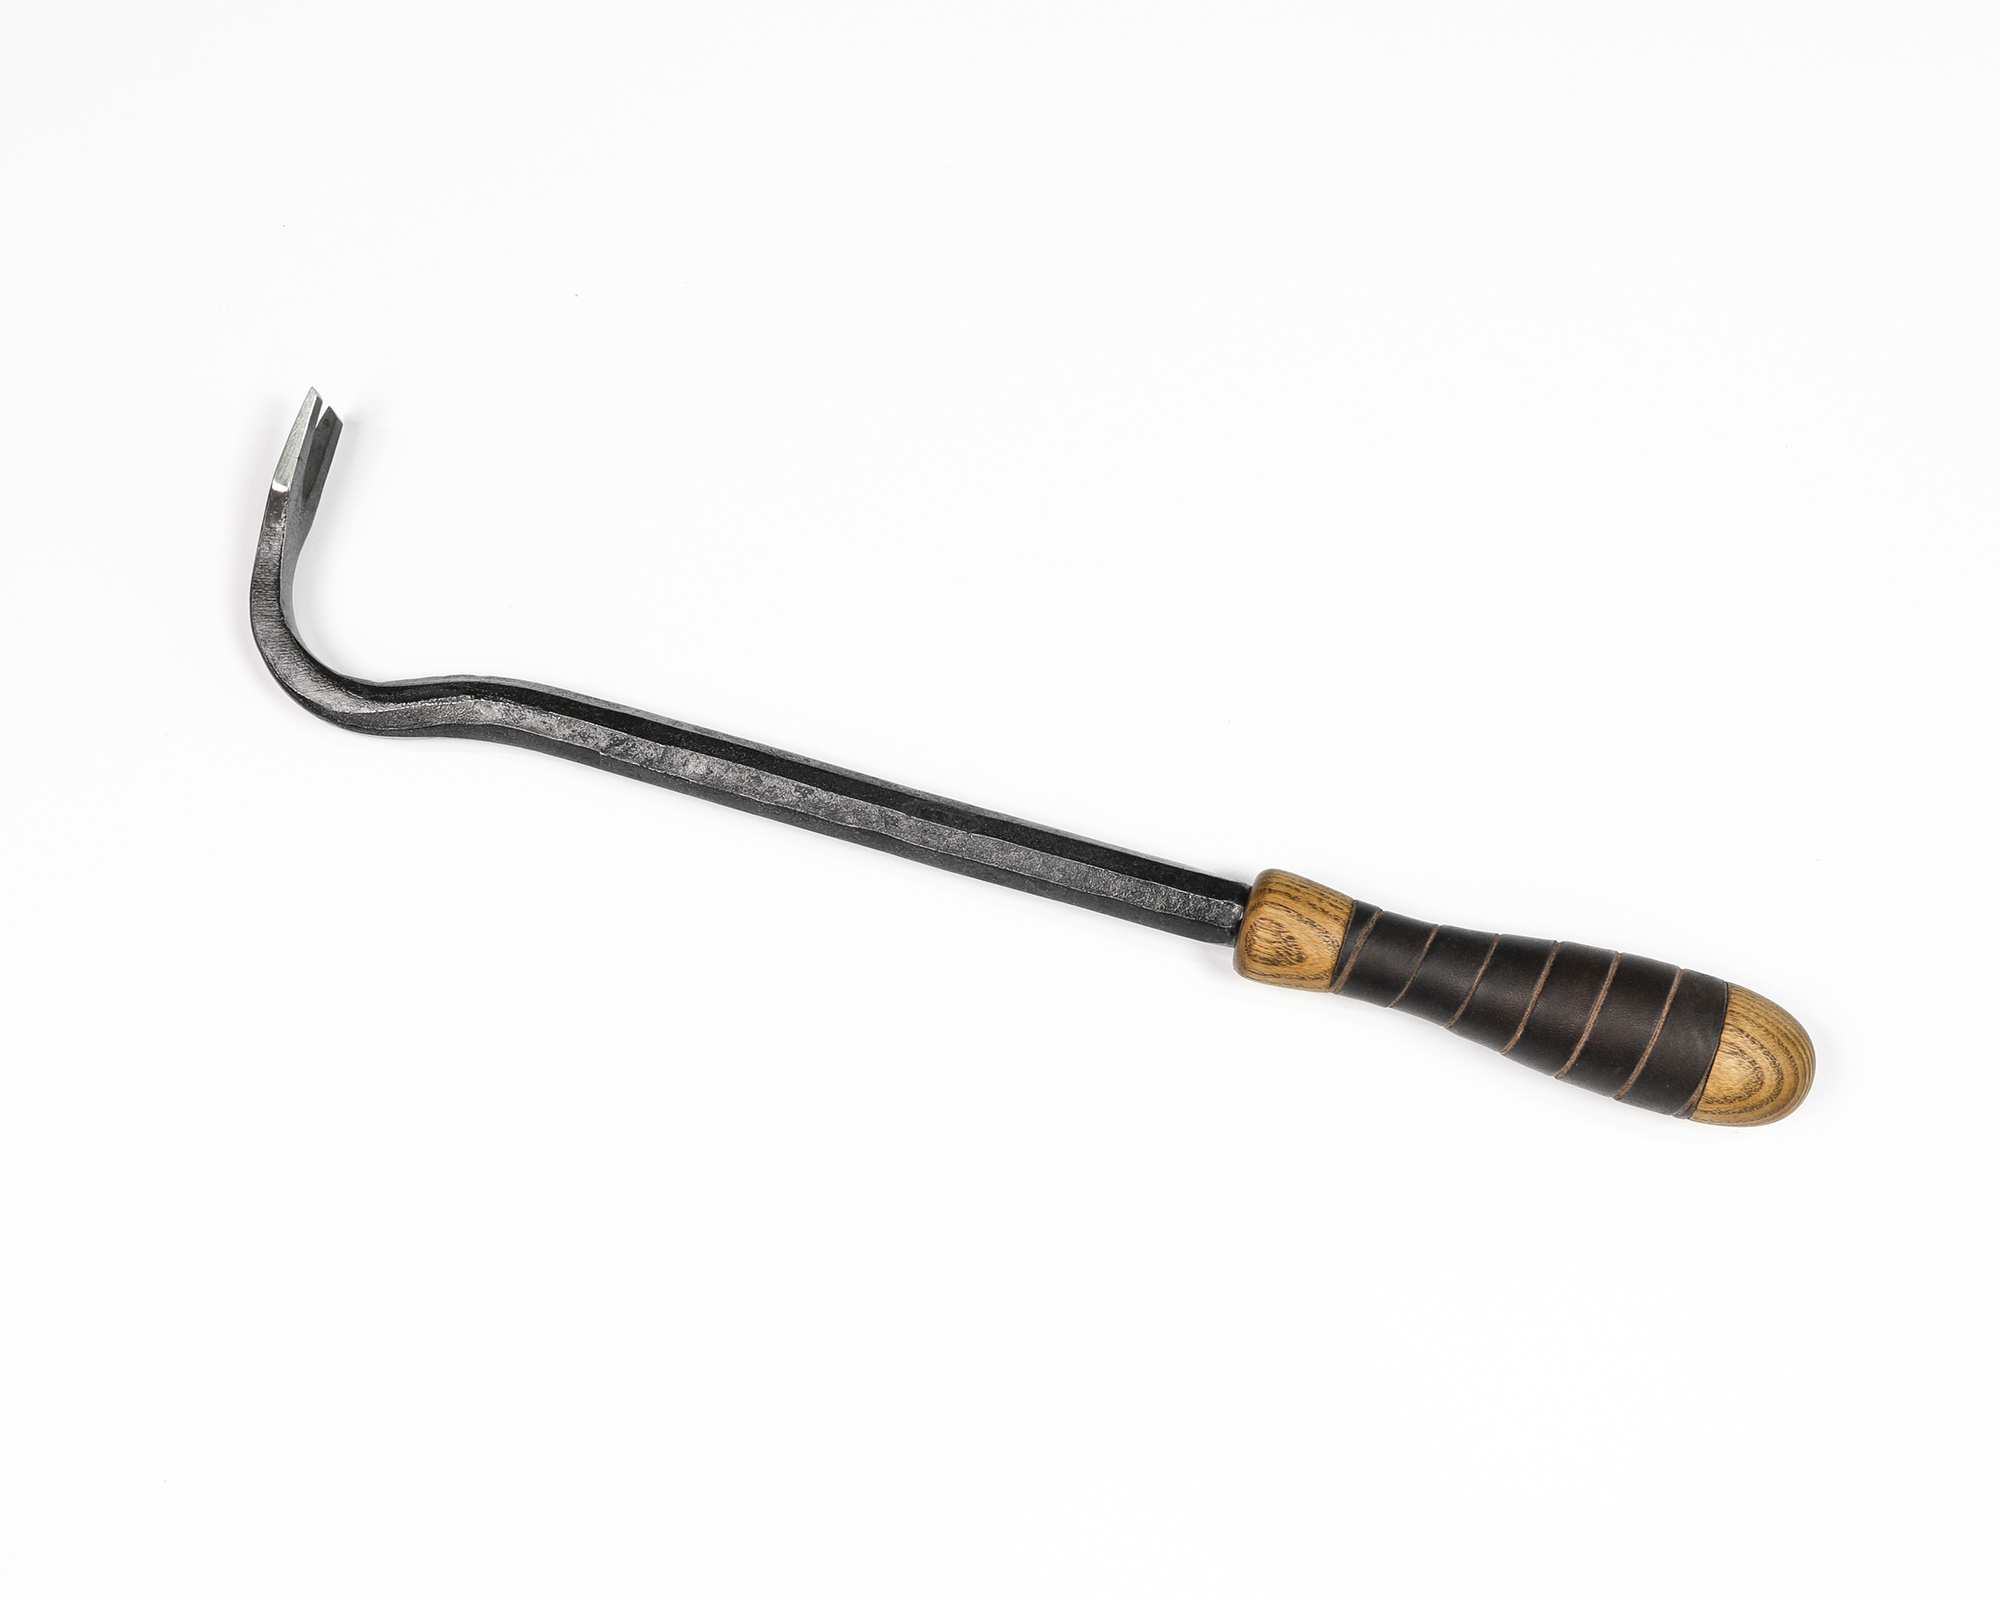 Small hammer with nail puller with loop case